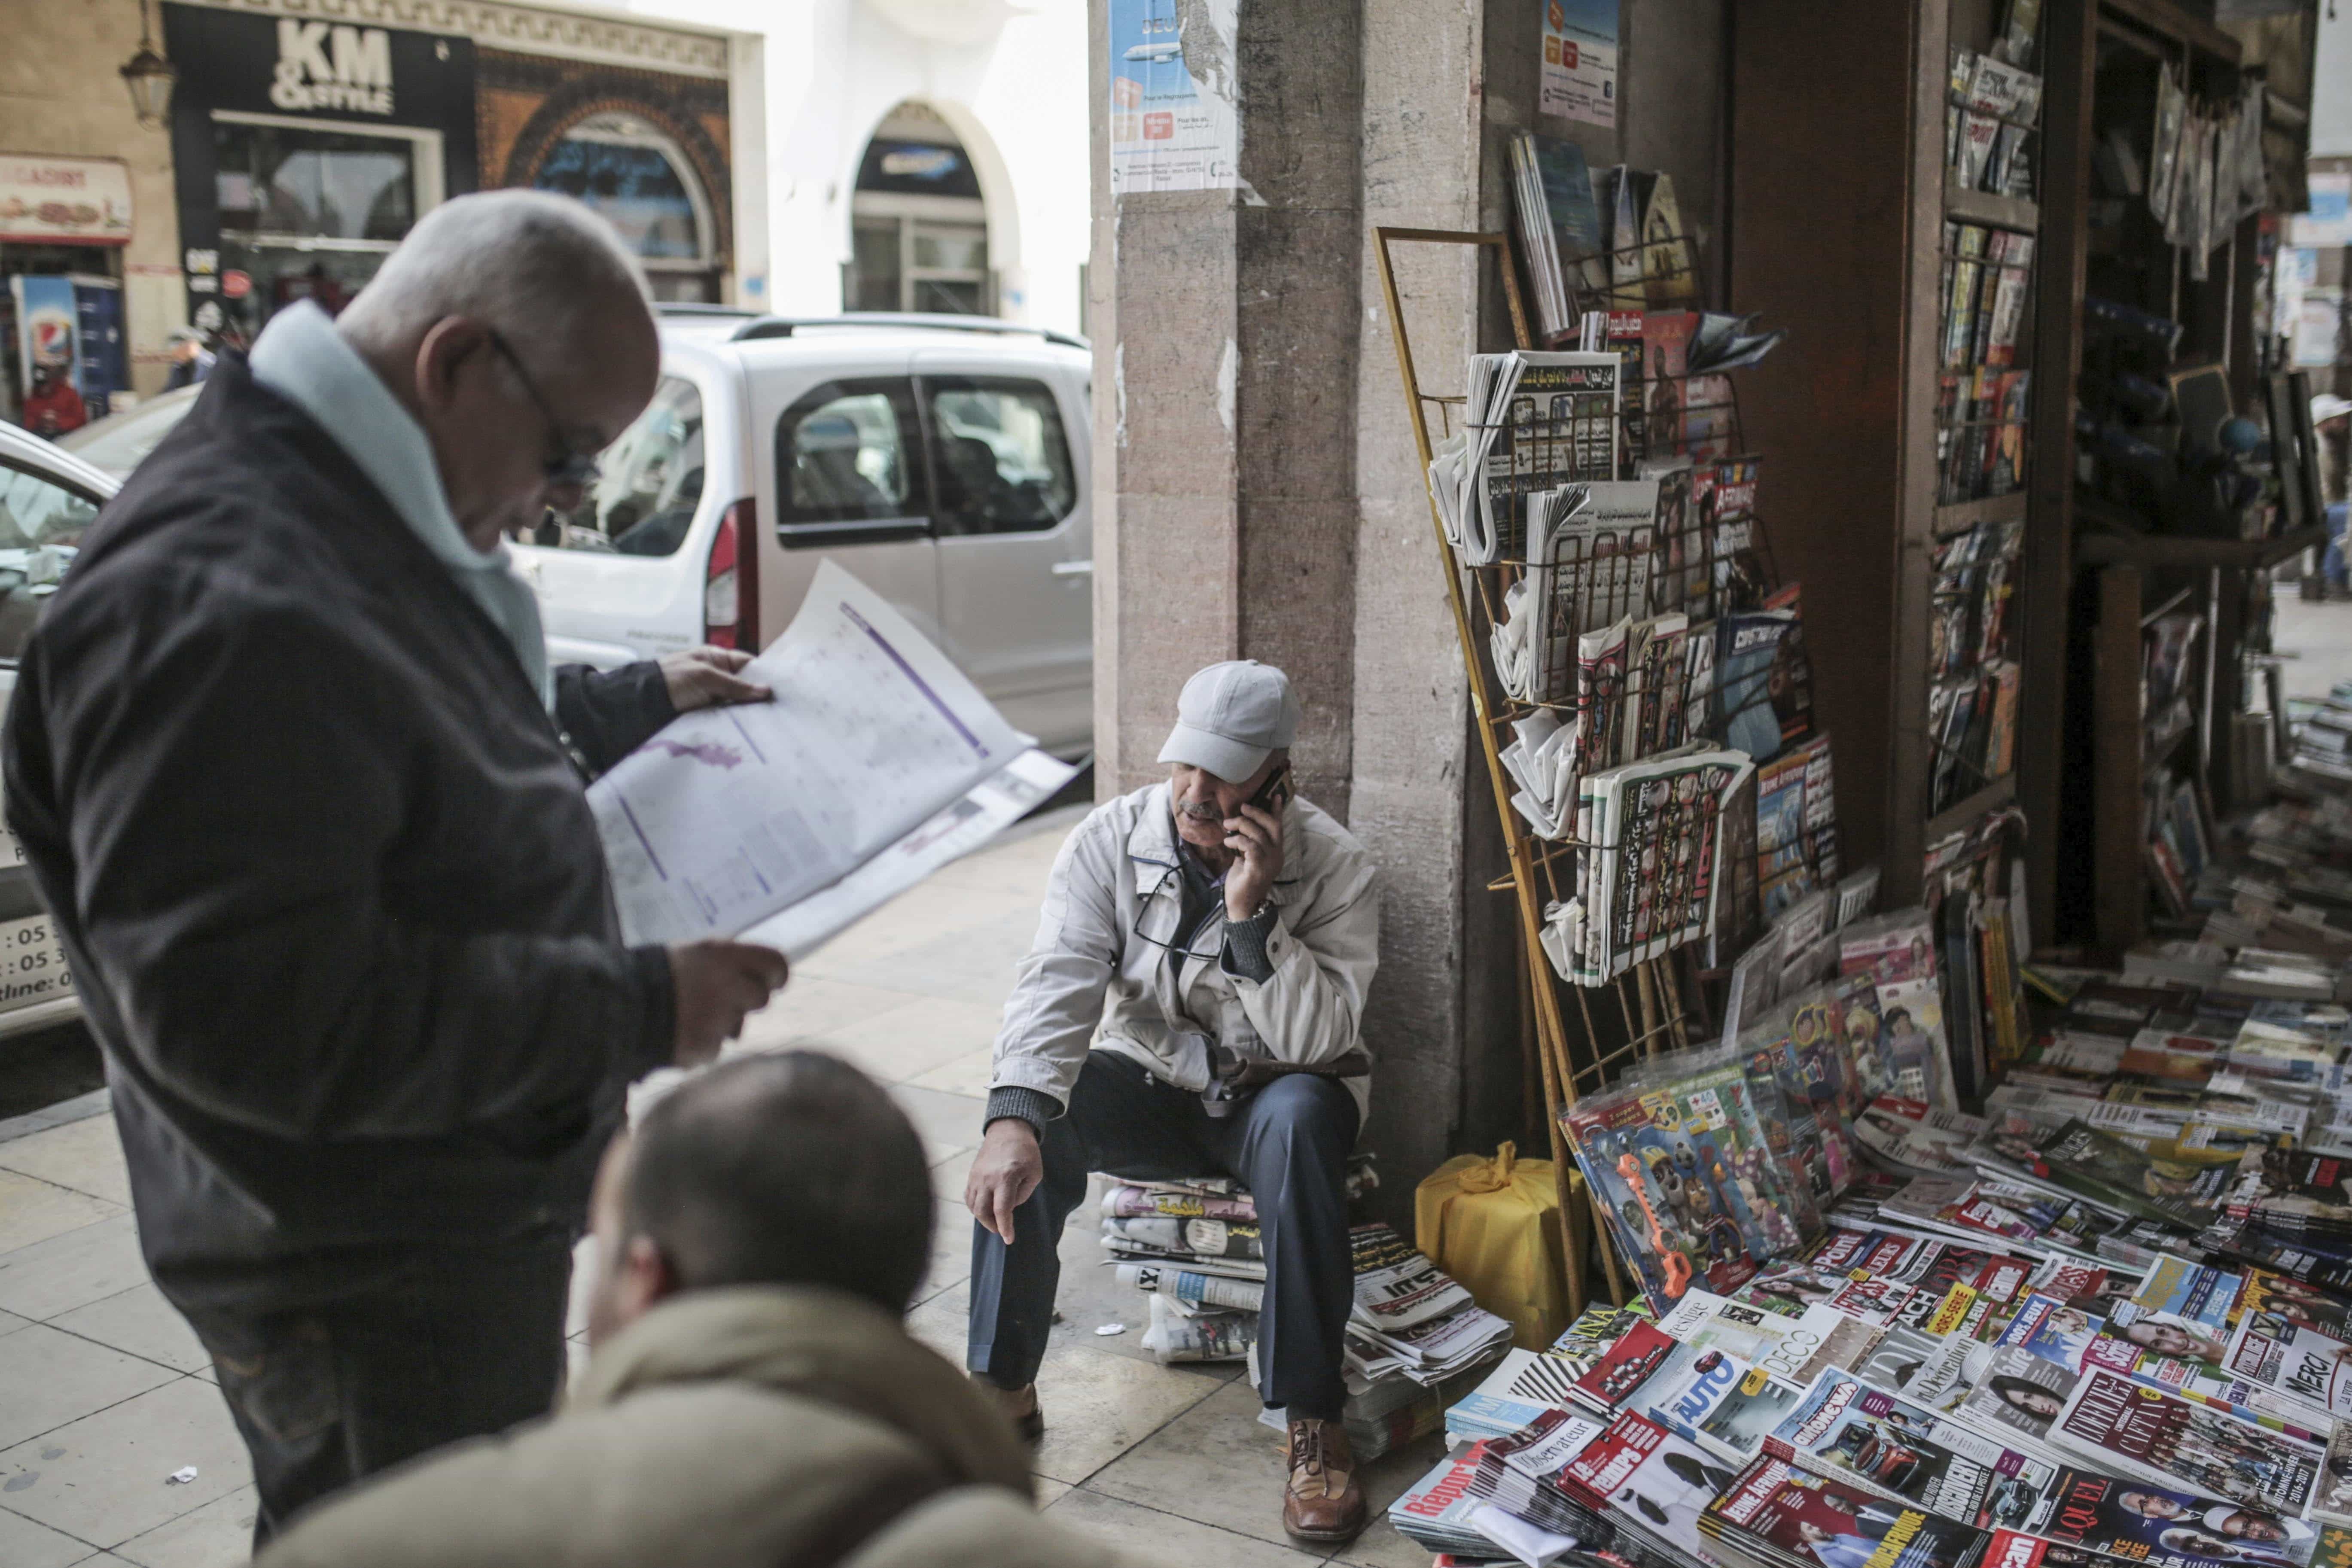 A man reads a newspaper at a stall near the Medina of Rabat, Morocco, 16 March 2017, AP Photo/Mosa'ab Elshamy